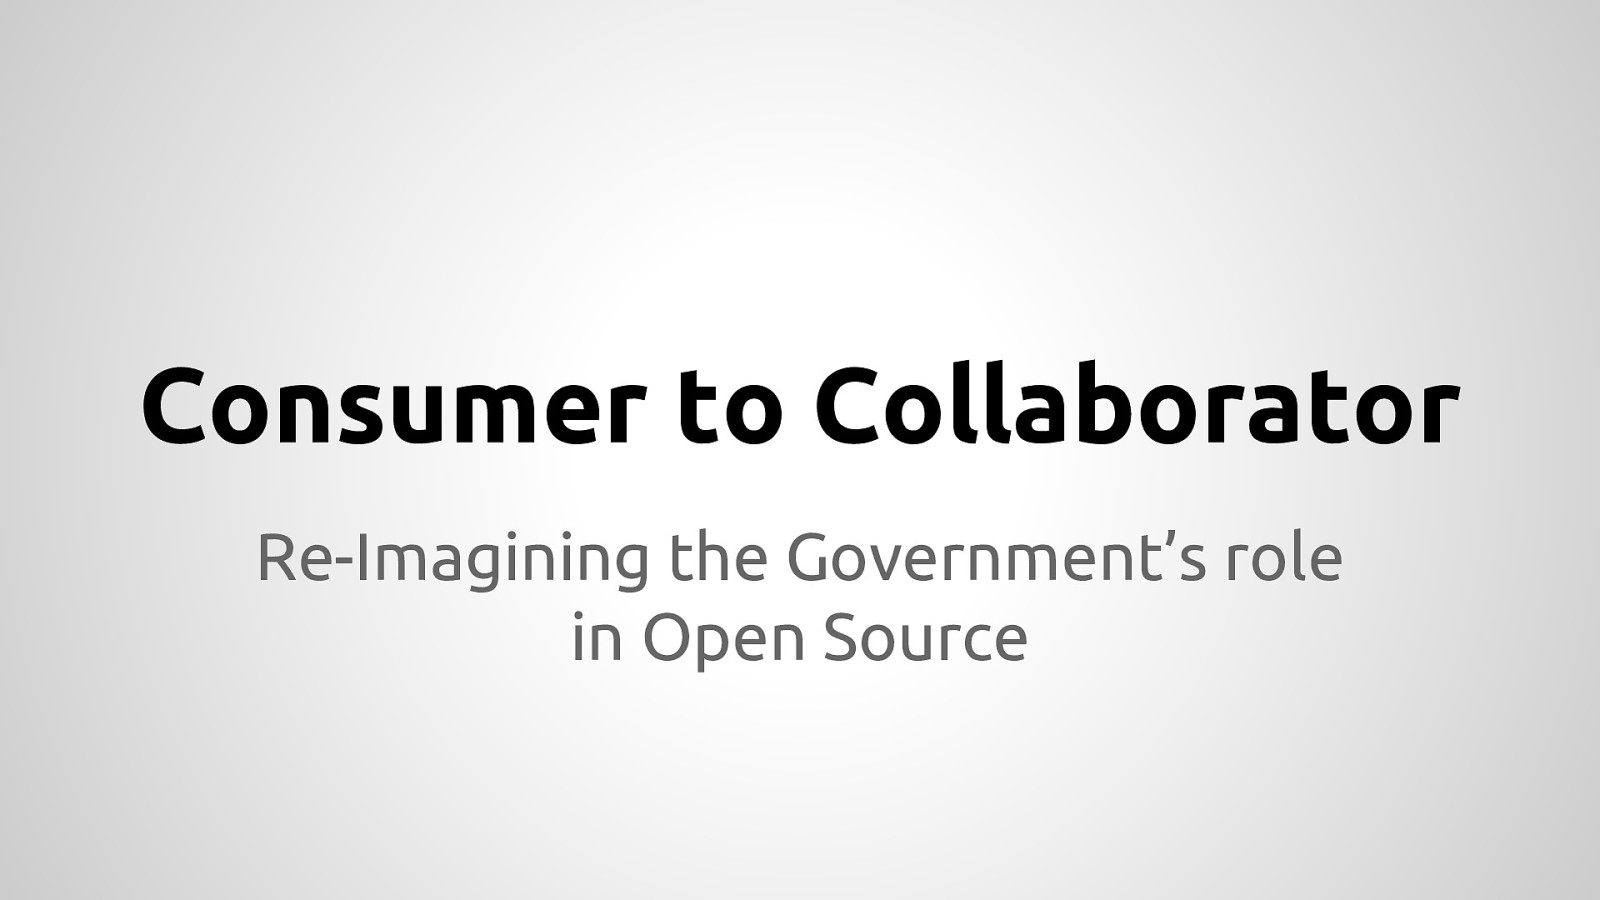 Consumer to Collaborator: Re-imaging the US Government’s role in Open Source